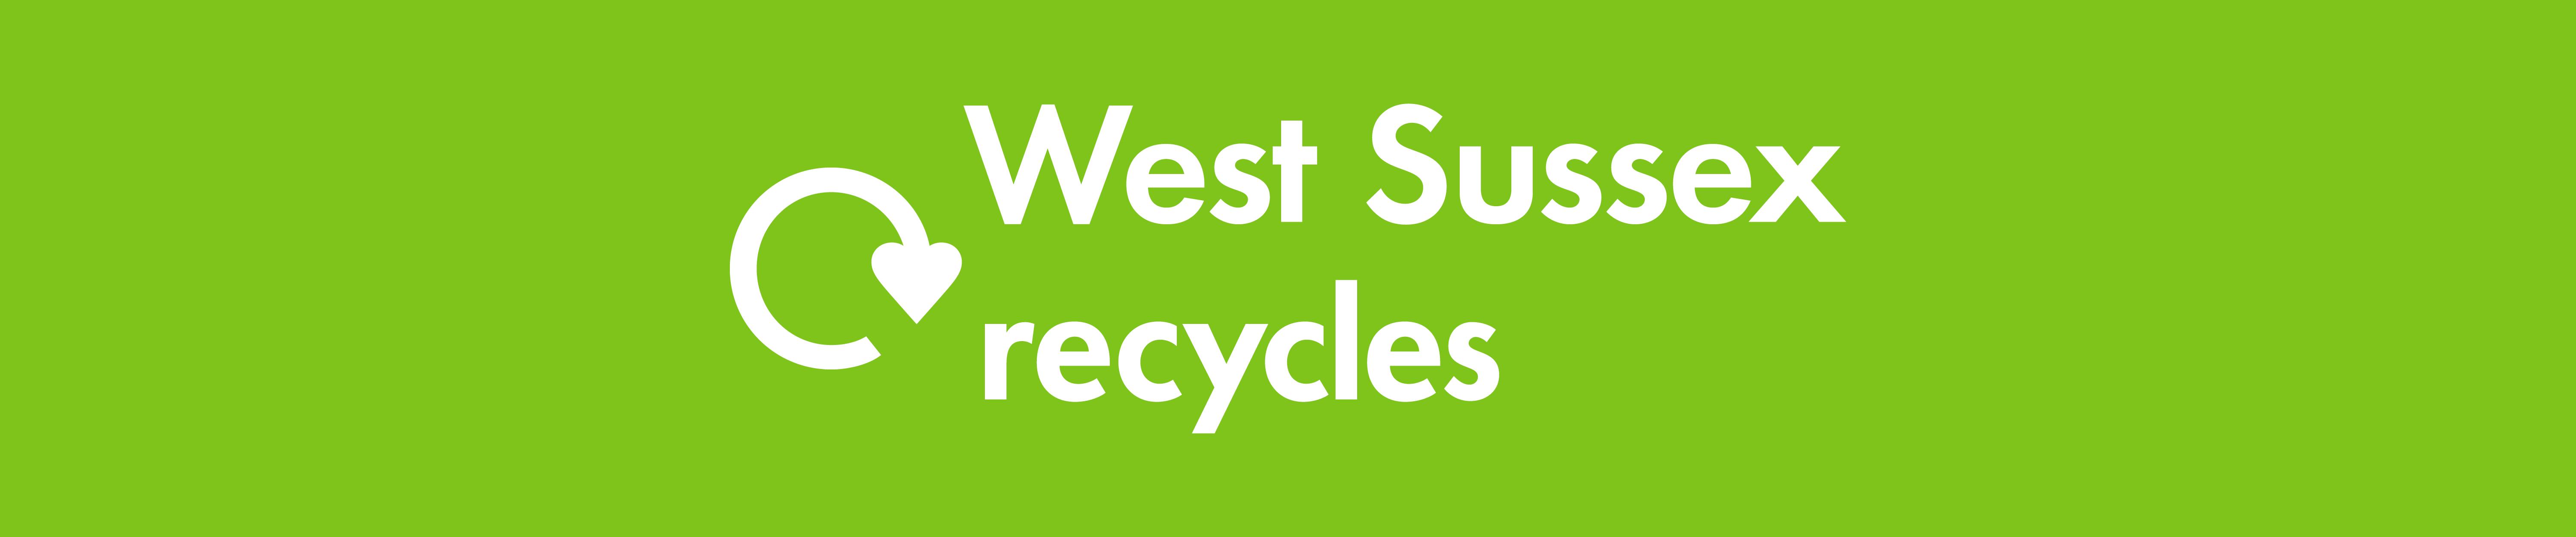 West Sussex recycles logo banner